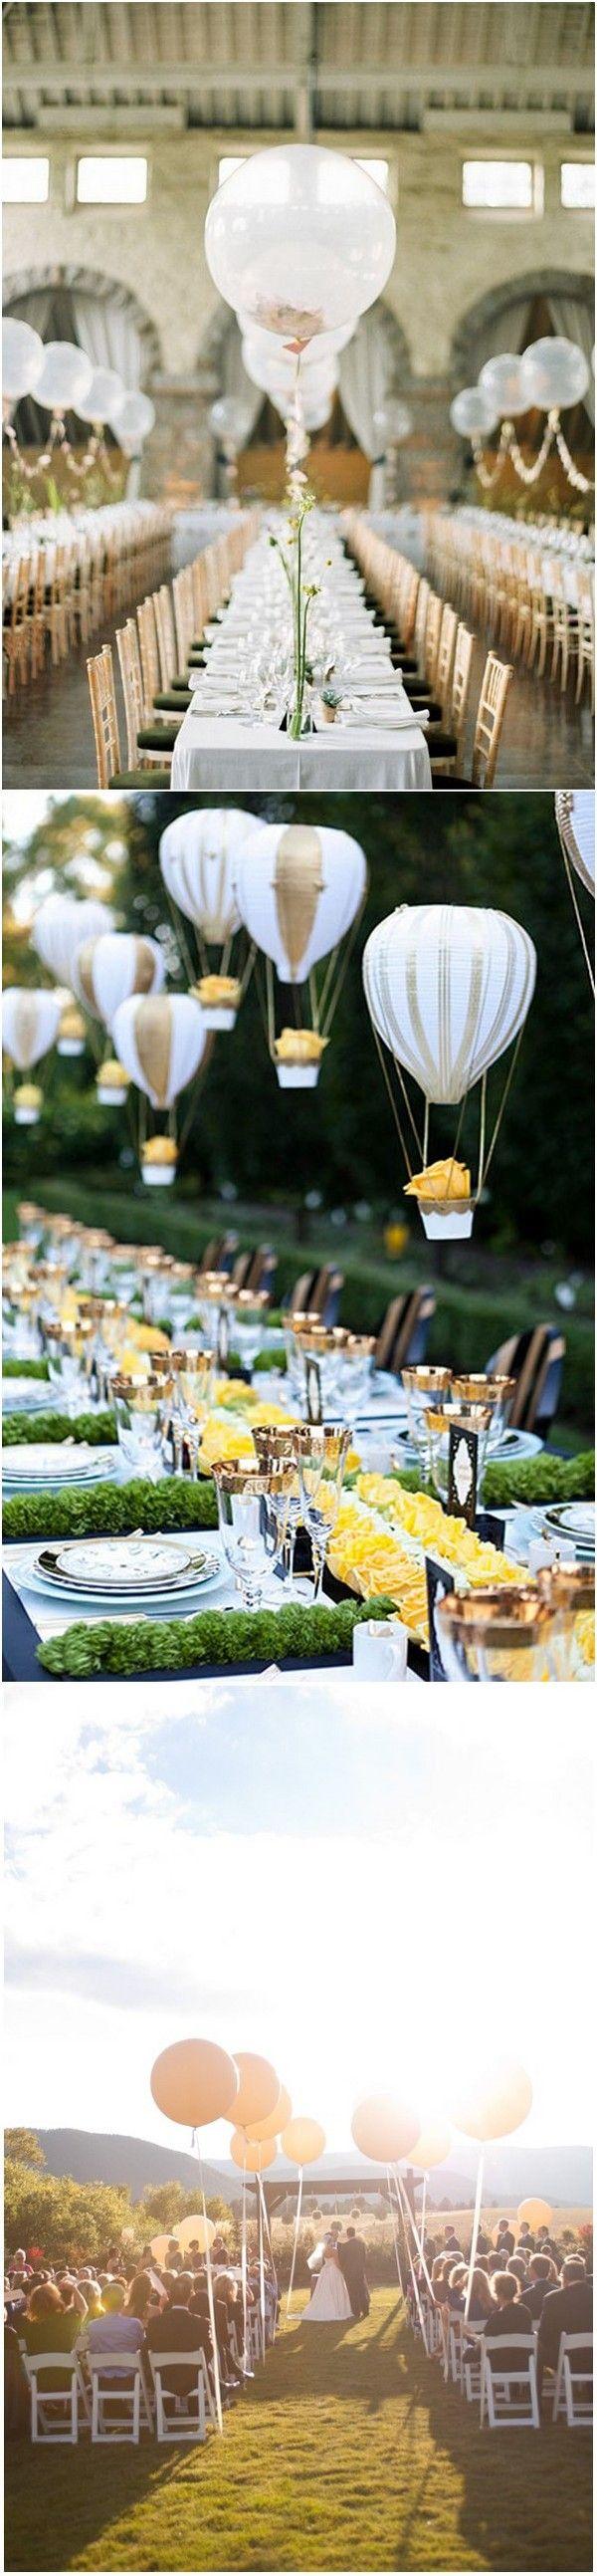 Mariage - 16 Romantic Wedding Decoration Ideas With Balloons - Page 3 Of 3